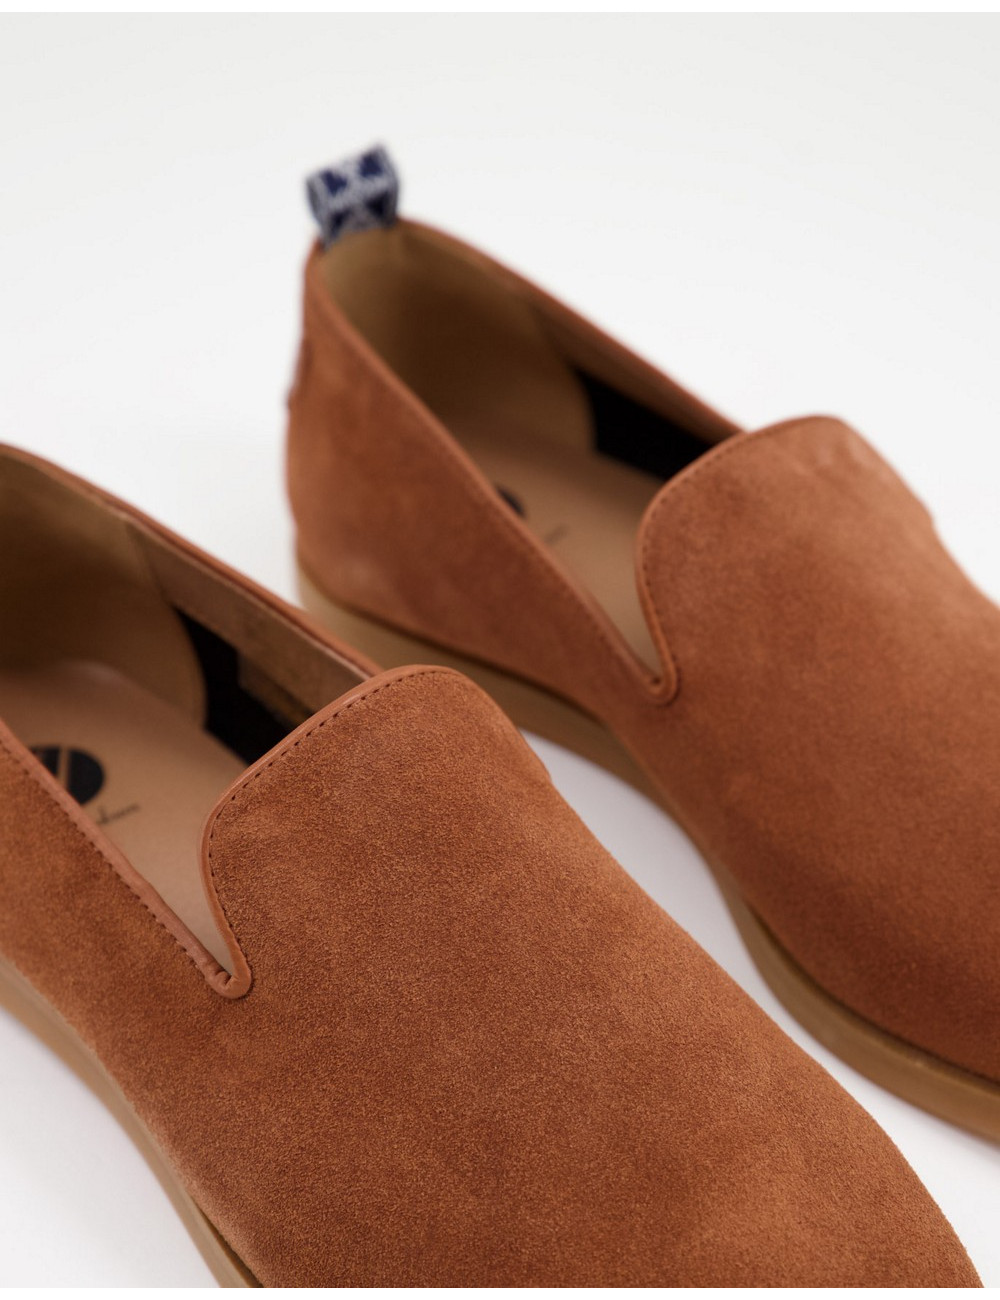 H by Hudson parker suede...